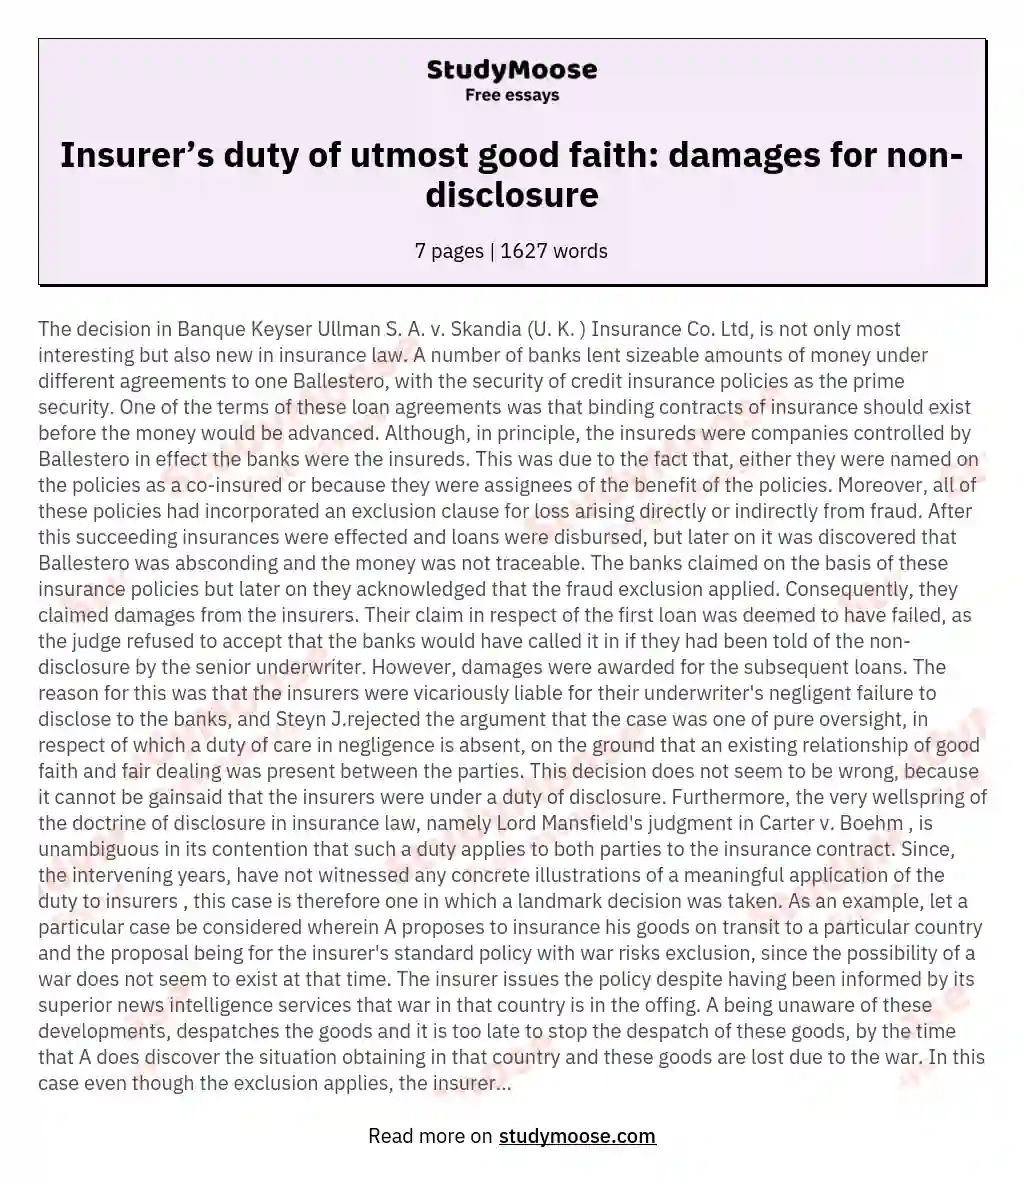 Insurer’s duty of utmost good faith: damages for non-disclosure